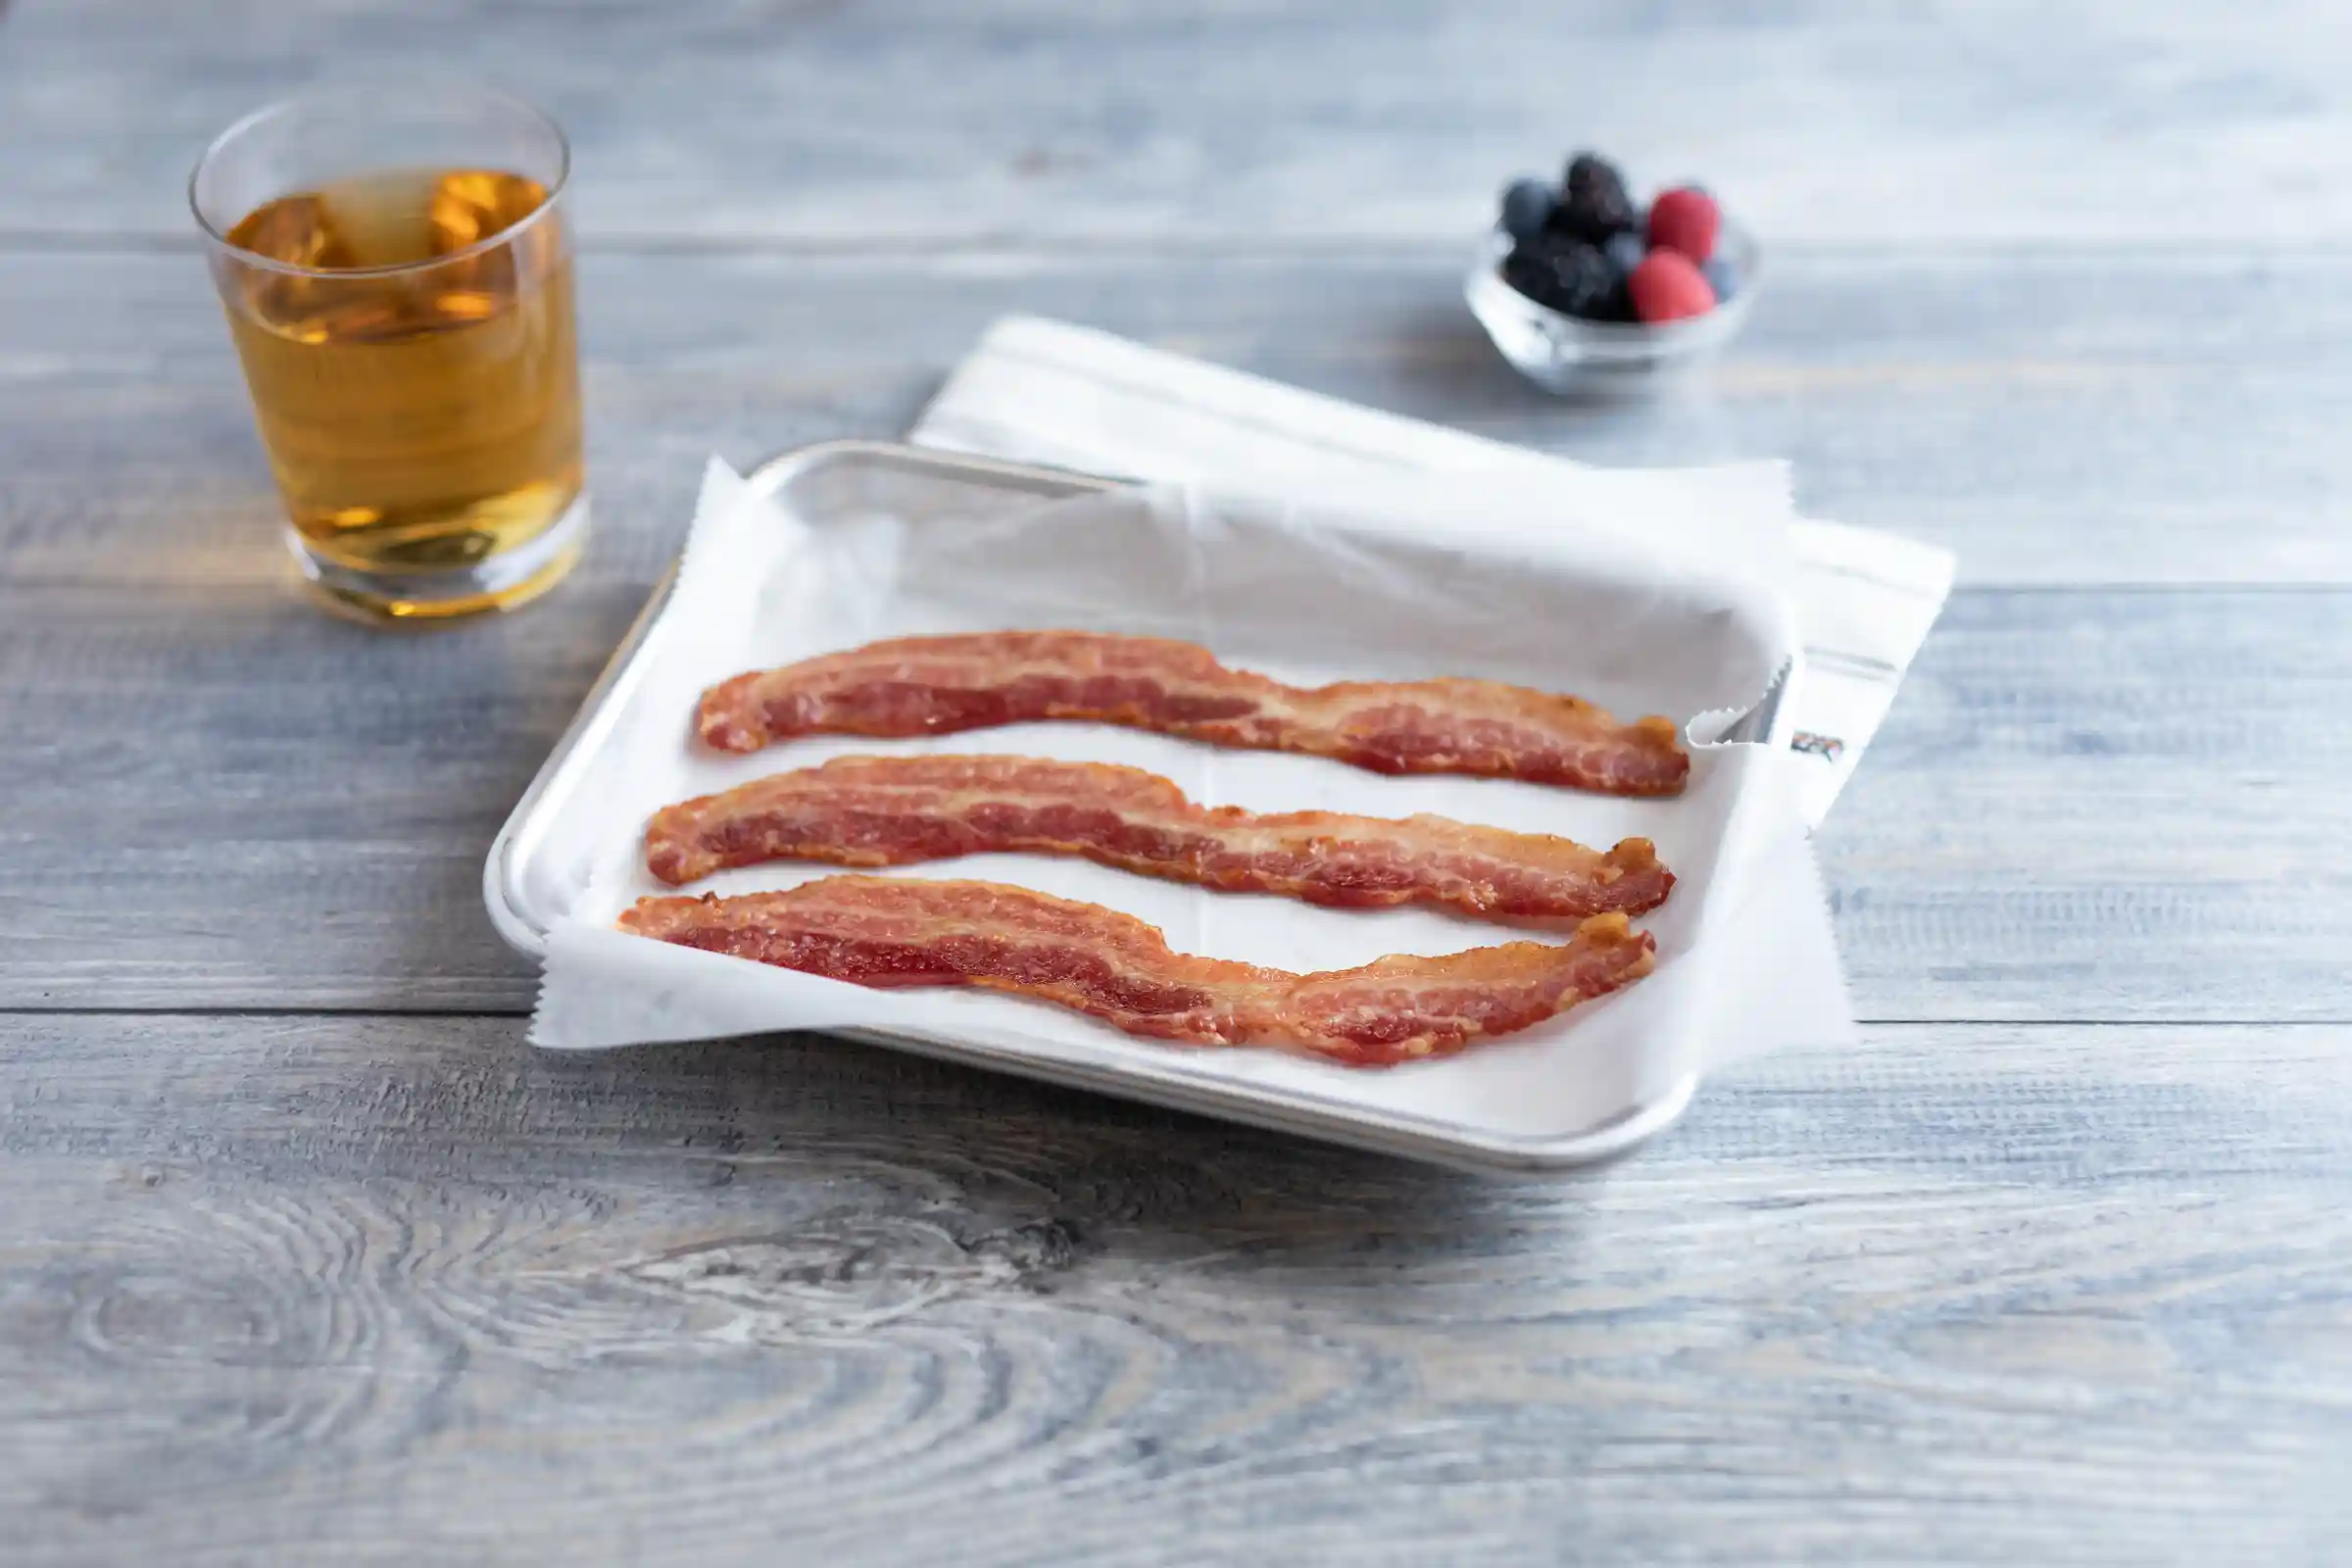 Wright® Brand Naturally Hickory Smoked Regular Sliced Bacon, Bulk, 15 Lbs, 14-18 Slices per Pound, Frozen_image_11